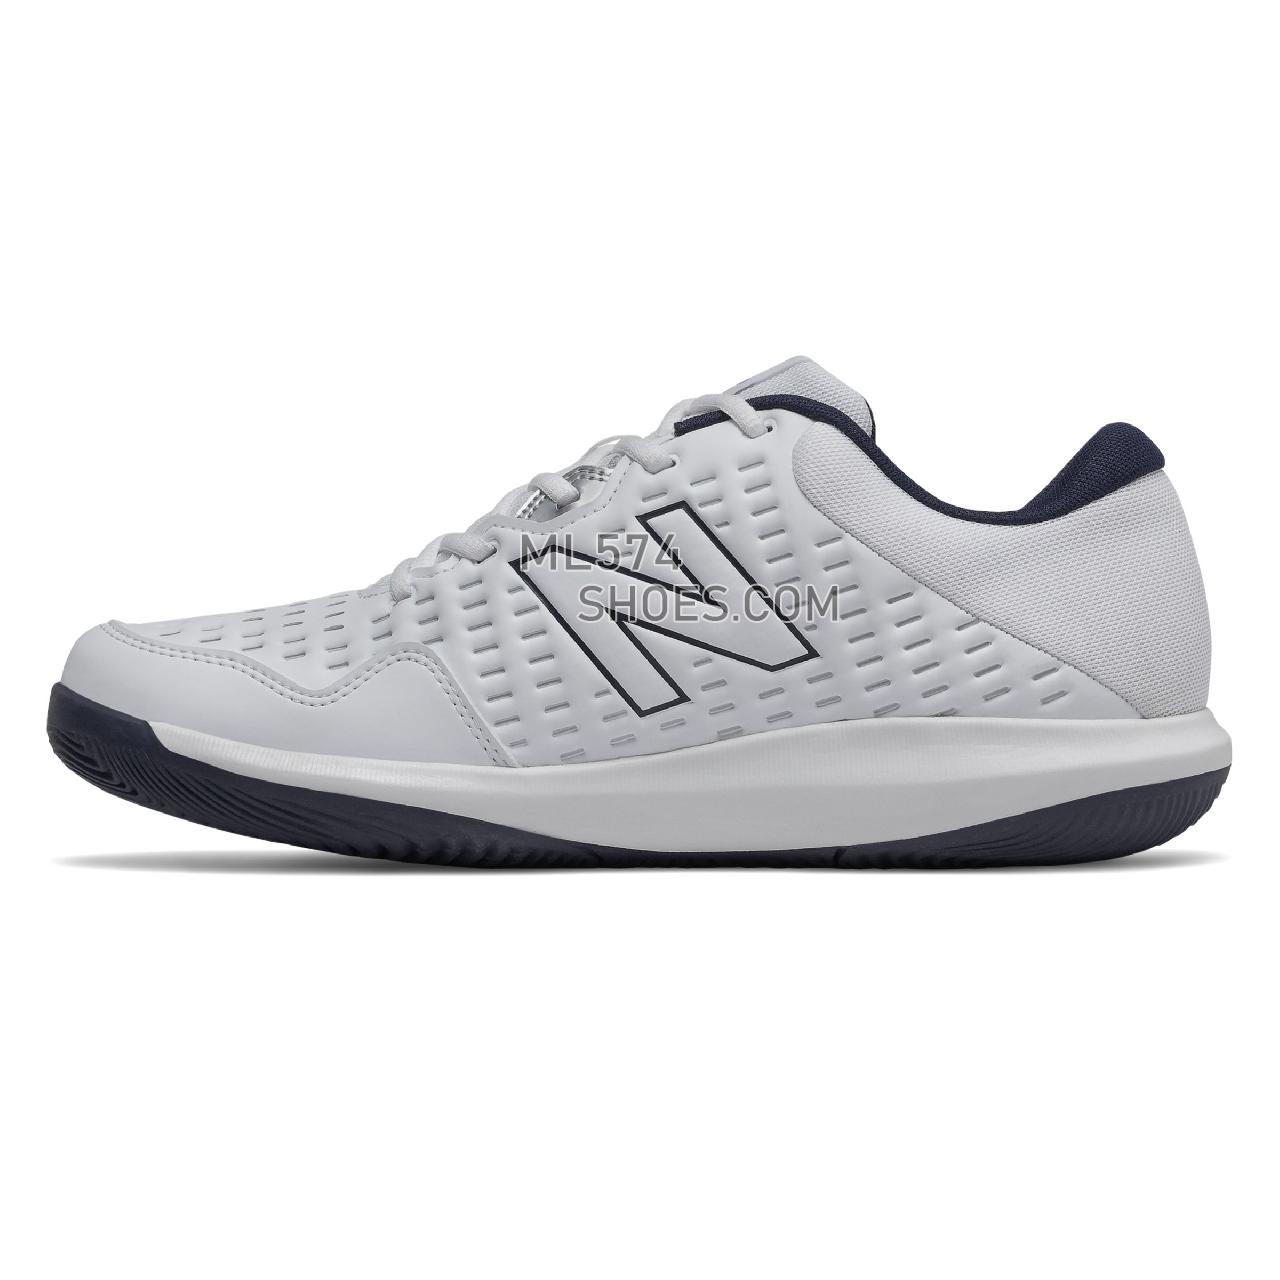 New Balance 696v4 - Men's Tennis - White with Pigment - MCH696W4